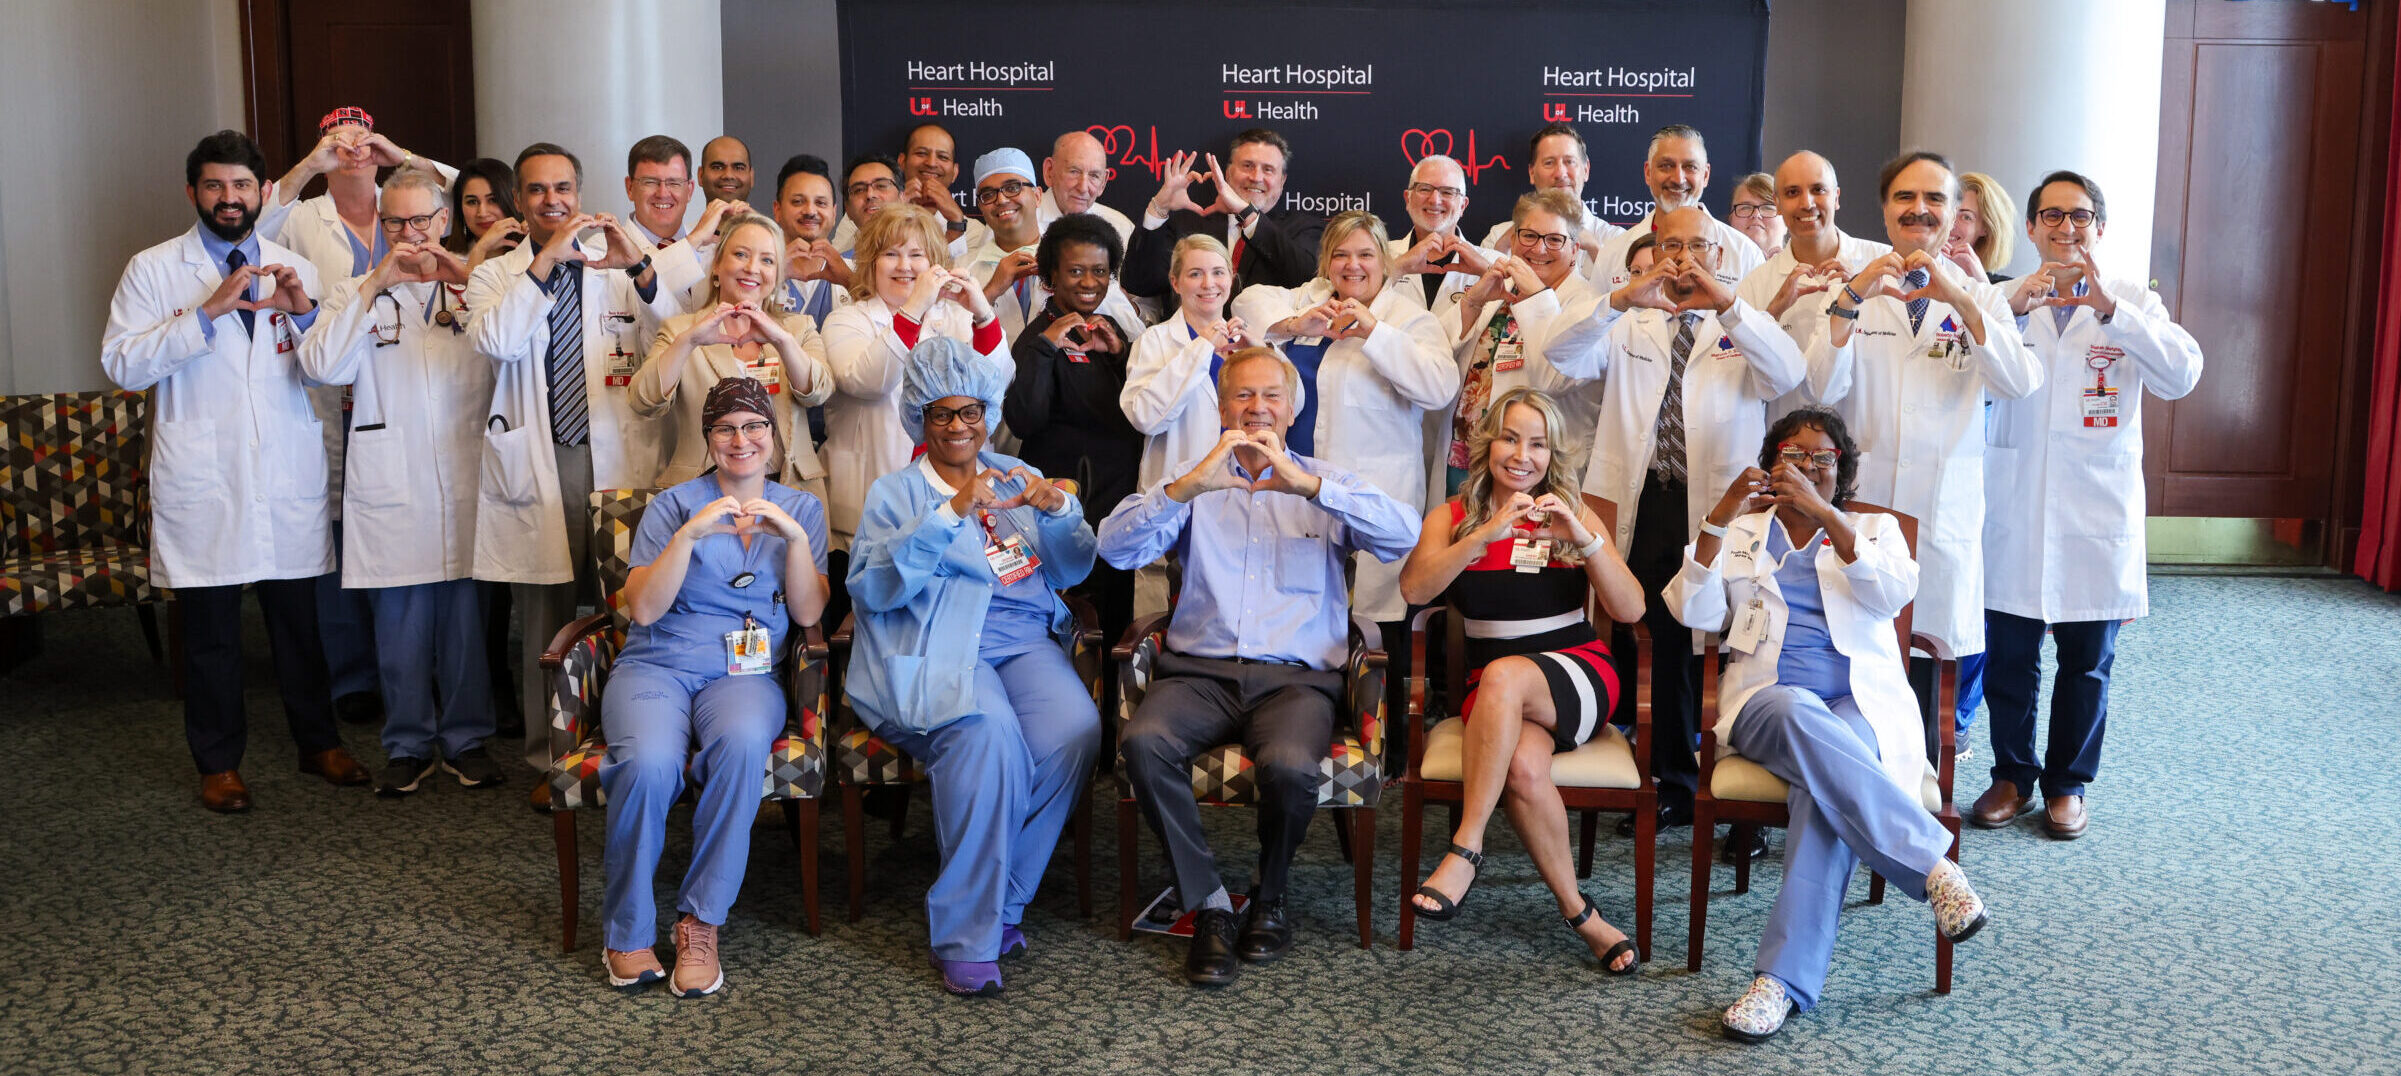 Group photo of the UofL Health – Heart Hospital team and patient John Crush. All are making a heart shape with their hands.